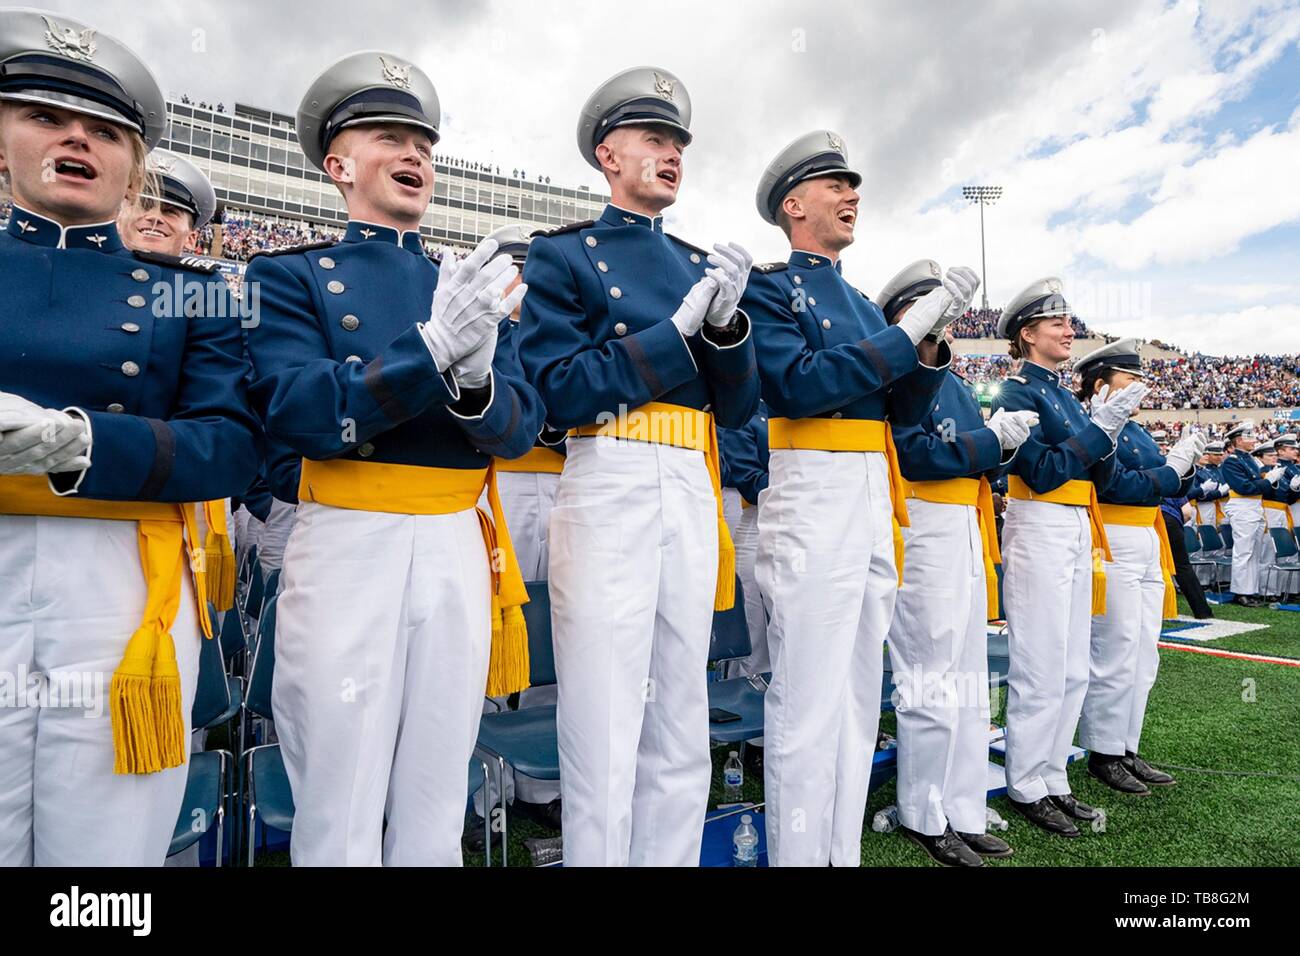 U.S. Air Force Academy cadets applaud at the conclusion of graduation ceremonies at the USAF Academy Falcon Stadium May 30, 2019 in Colorado Springs, Colorado. U.S. President Donald Trump gave the commencement address to the more than 900 graduates. Credit: Planetpix/Alamy Live News Stock Photo